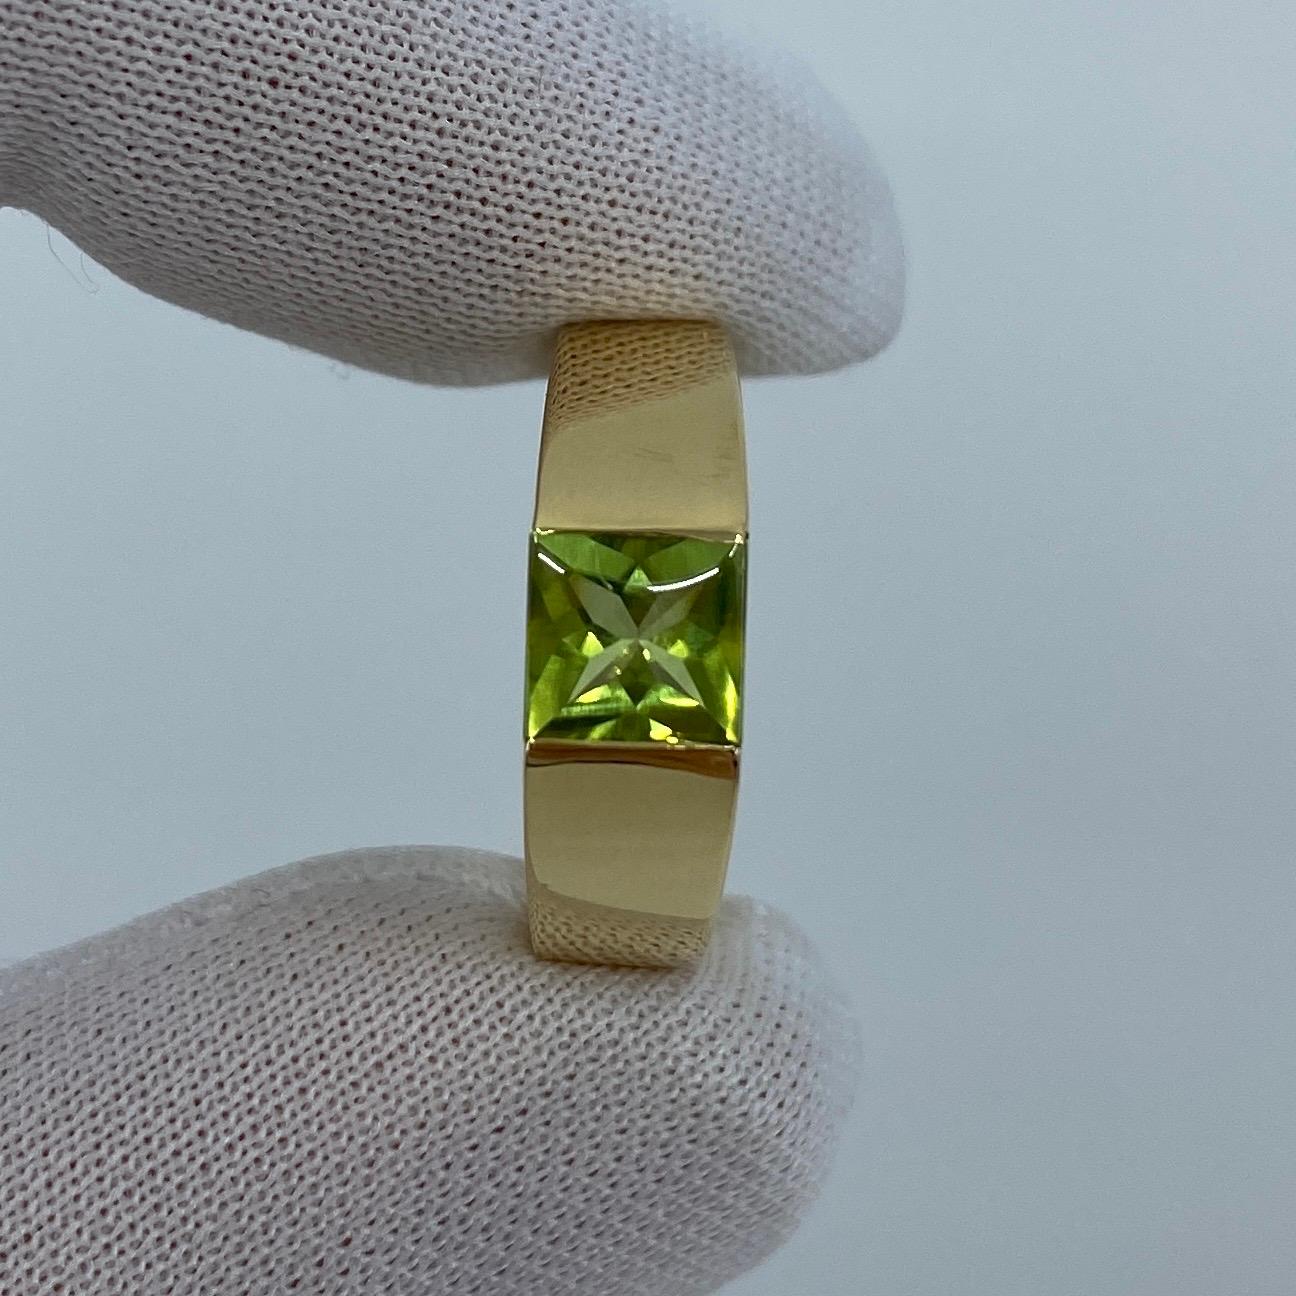 Cartier Green Peridot 18k Yellow Gold Tank Ring.

Stunning yellow gold ring with a 6mm tension set vivid green peridot. Fine jewellery houses like Cartier only use the finest of gemstones and this peridotis no exception. A top grade peridot with a